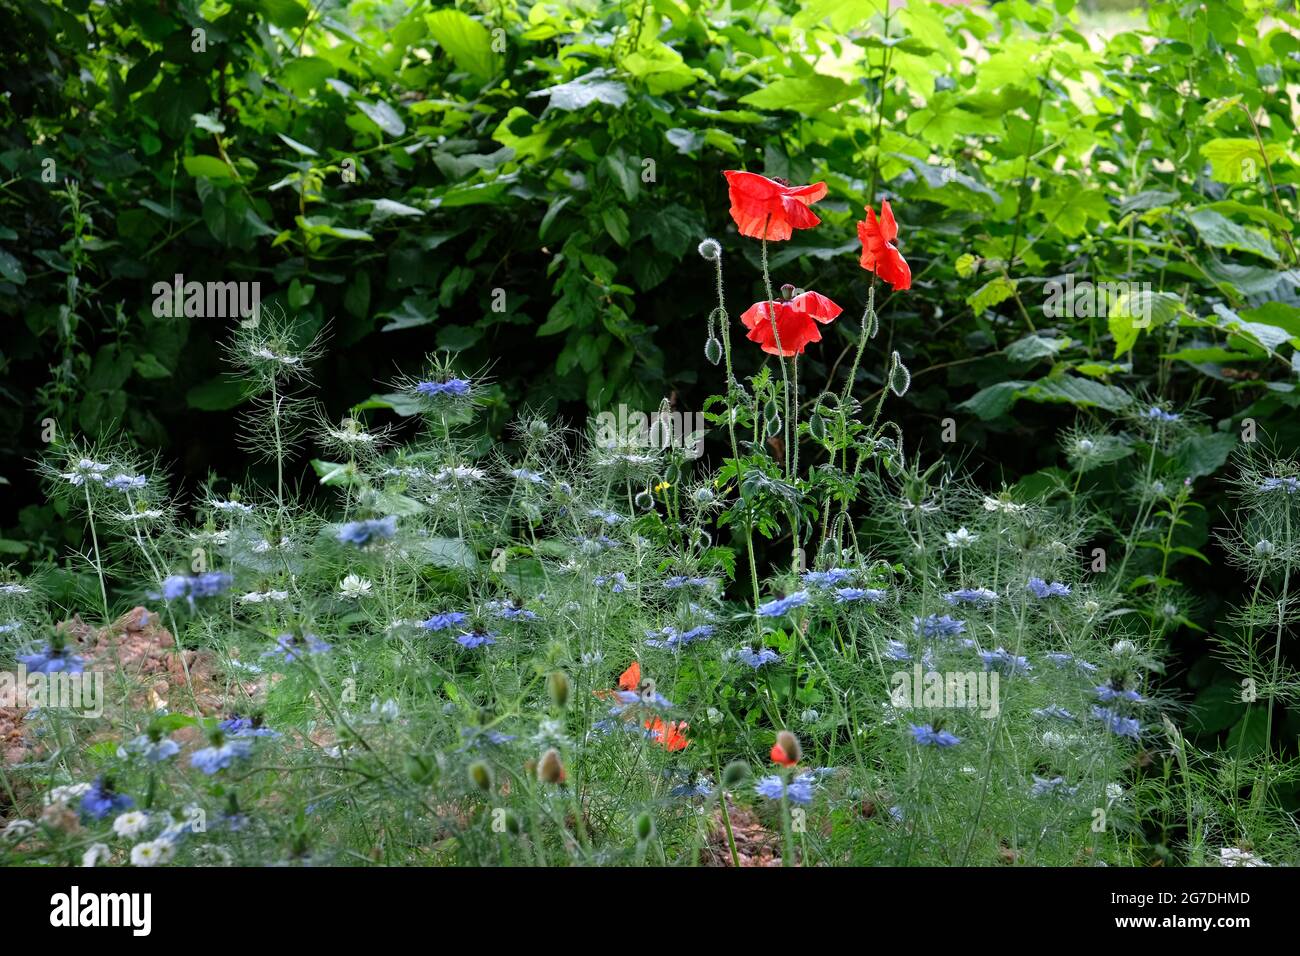 Red poppy, Papaver rhoeas, among Love-in-a-mist, Nigella damascena, and other garden wildflowers in Shropshire, England, UK Stock Photo